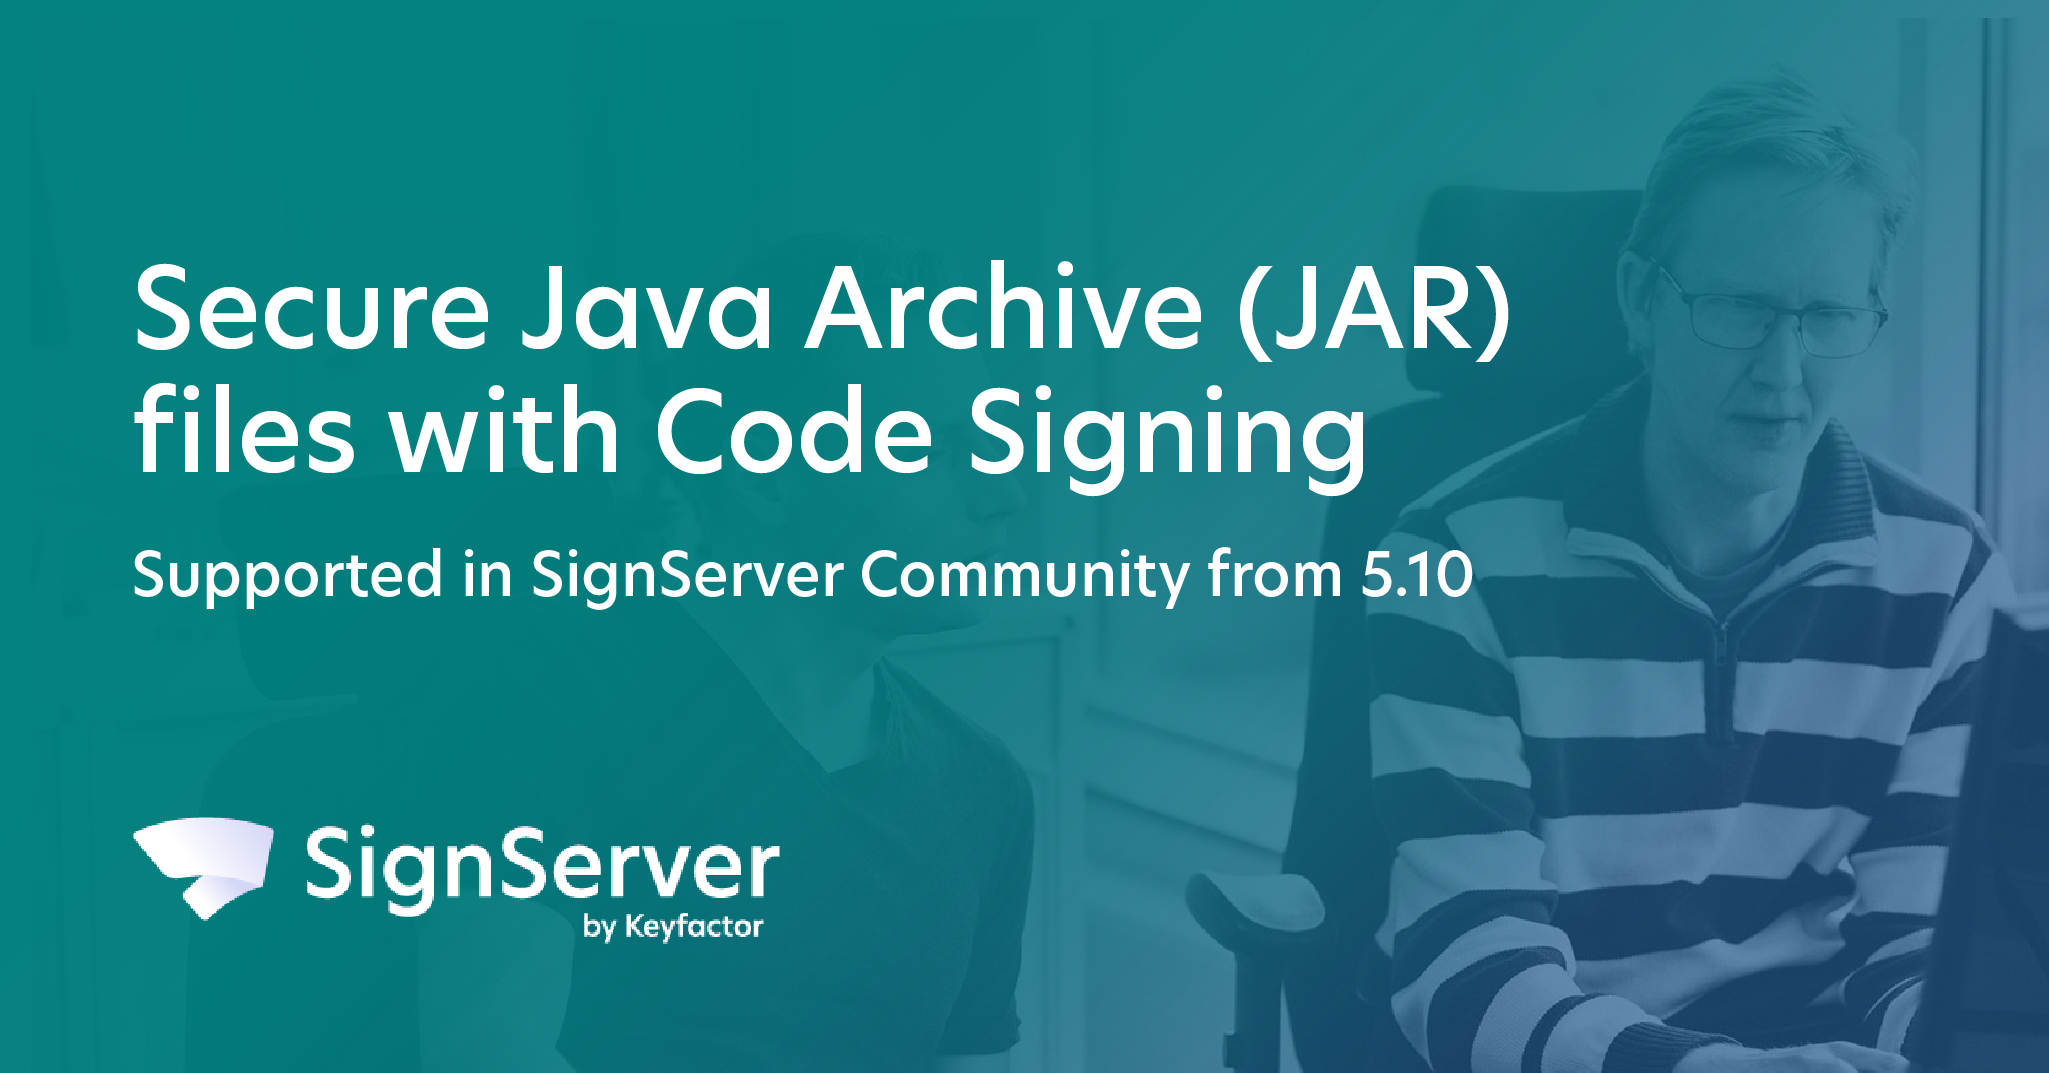 Securing Java Archive (JAR) files with Code Signing